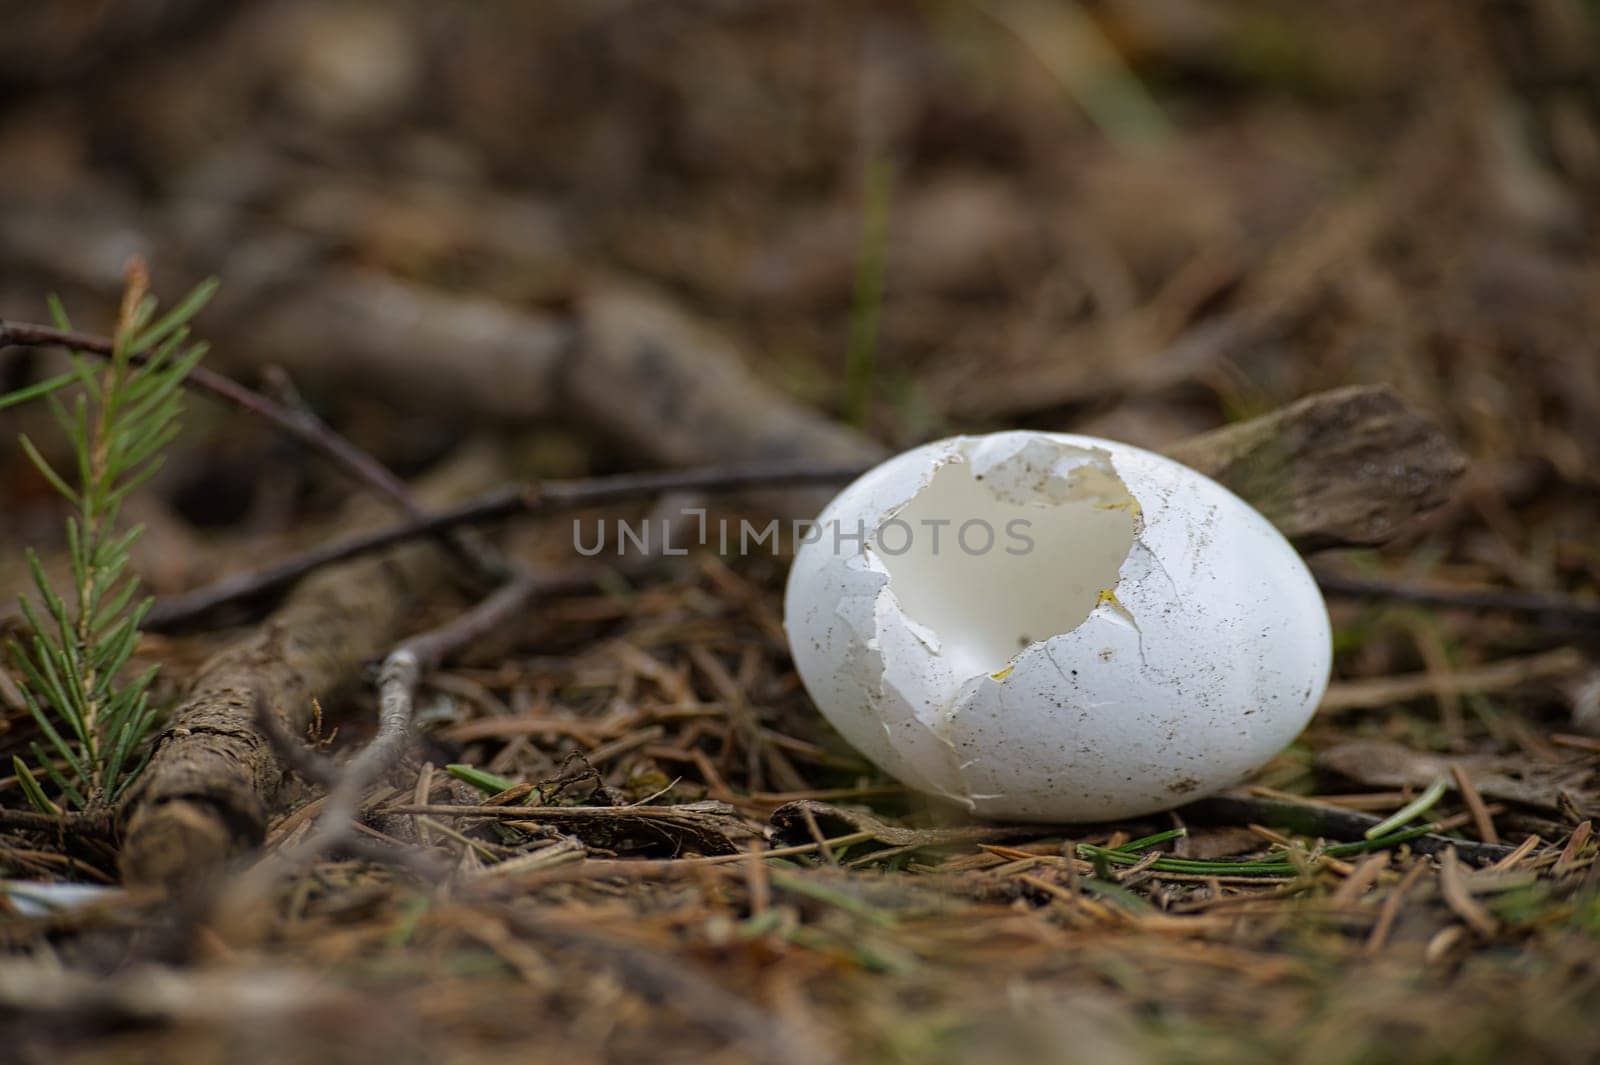 Damage eggshell among pine needles and bits of branches by NetPix